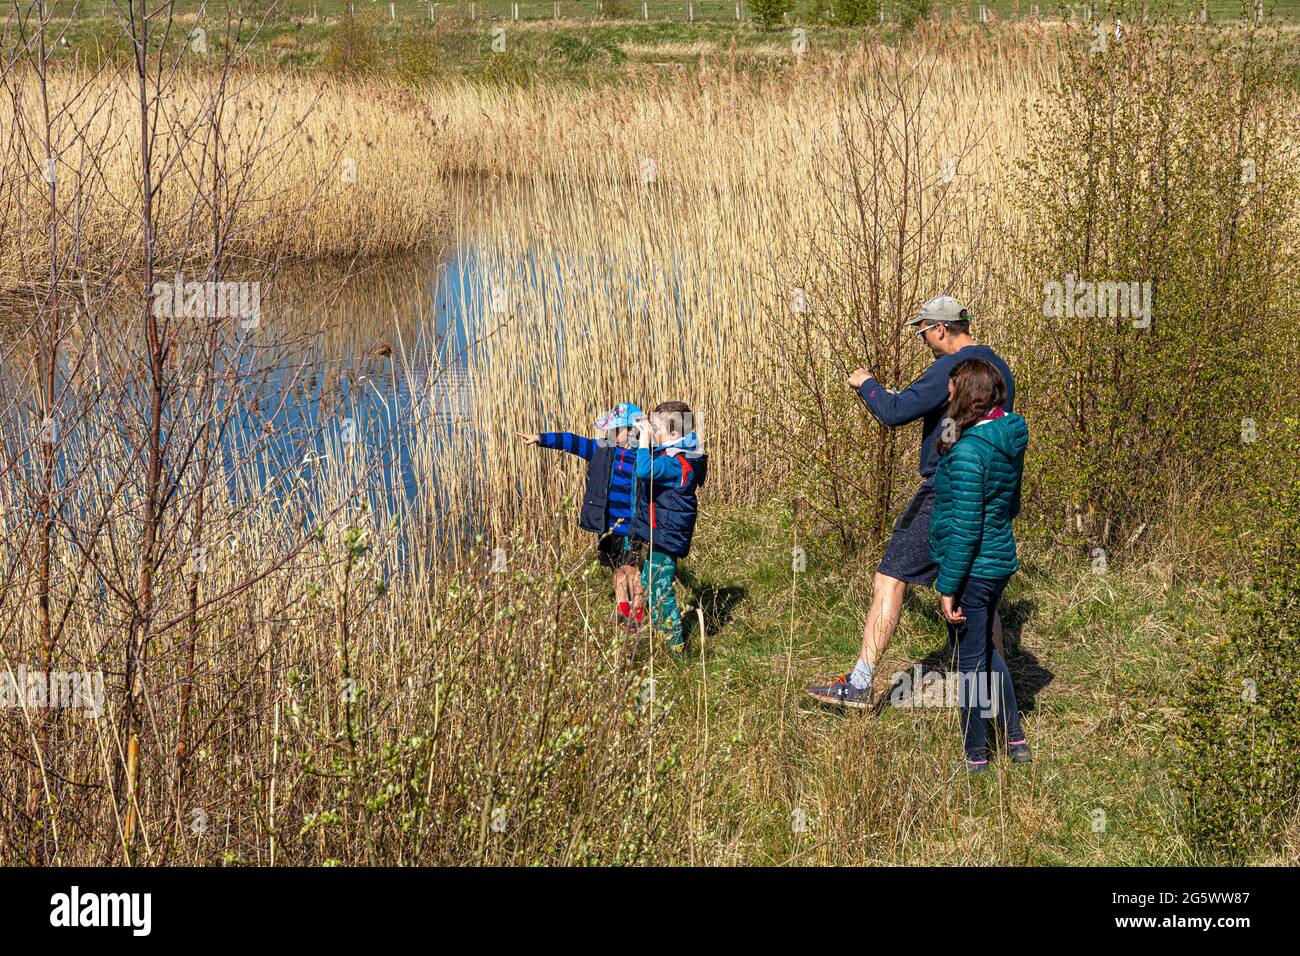 A family enjoying looking for wildfowl in the reedbeds at St Aidans RSPB Nature Reserve near Castleford, West Yorkshire UK Stock Photo